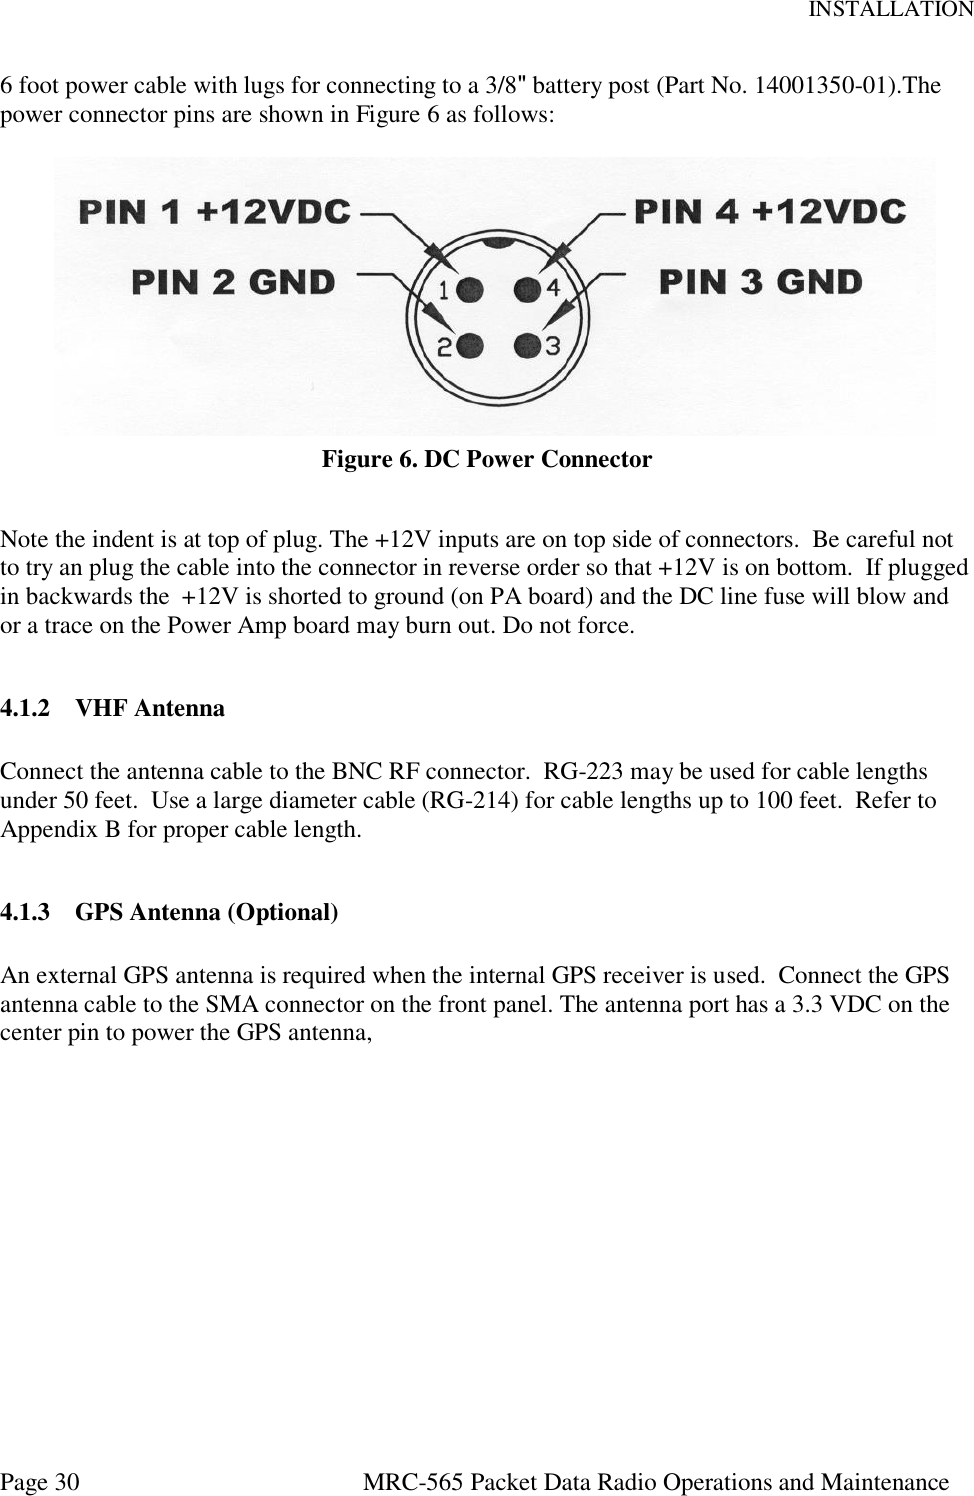 INSTALLATION Page 30  MRC-565 Packet Data Radio Operations and Maintenance 6 foot power cable with lugs for connecting to a 3/8&quot; battery post (Part No. 14001350-01).The power connector pins are shown in Figure 6 as follows:     Figure 6. DC Power Connector  Note the indent is at top of plug. The +12V inputs are on top side of connectors.  Be careful not to try an plug the cable into the connector in reverse order so that +12V is on bottom.  If plugged in backwards the  +12V is shorted to ground (on PA board) and the DC line fuse will blow and or a trace on the Power Amp board may burn out. Do not force.  4.1.2 VHF Antenna  Connect the antenna cable to the BNC RF connector.  RG-223 may be used for cable lengths under 50 feet.  Use a large diameter cable (RG-214) for cable lengths up to 100 feet.  Refer to Appendix B for proper cable length.  4.1.3 GPS Antenna (Optional)  An external GPS antenna is required when the internal GPS receiver is used.  Connect the GPS antenna cable to the SMA connector on the front panel. The antenna port has a 3.3 VDC on the center pin to power the GPS antenna,     